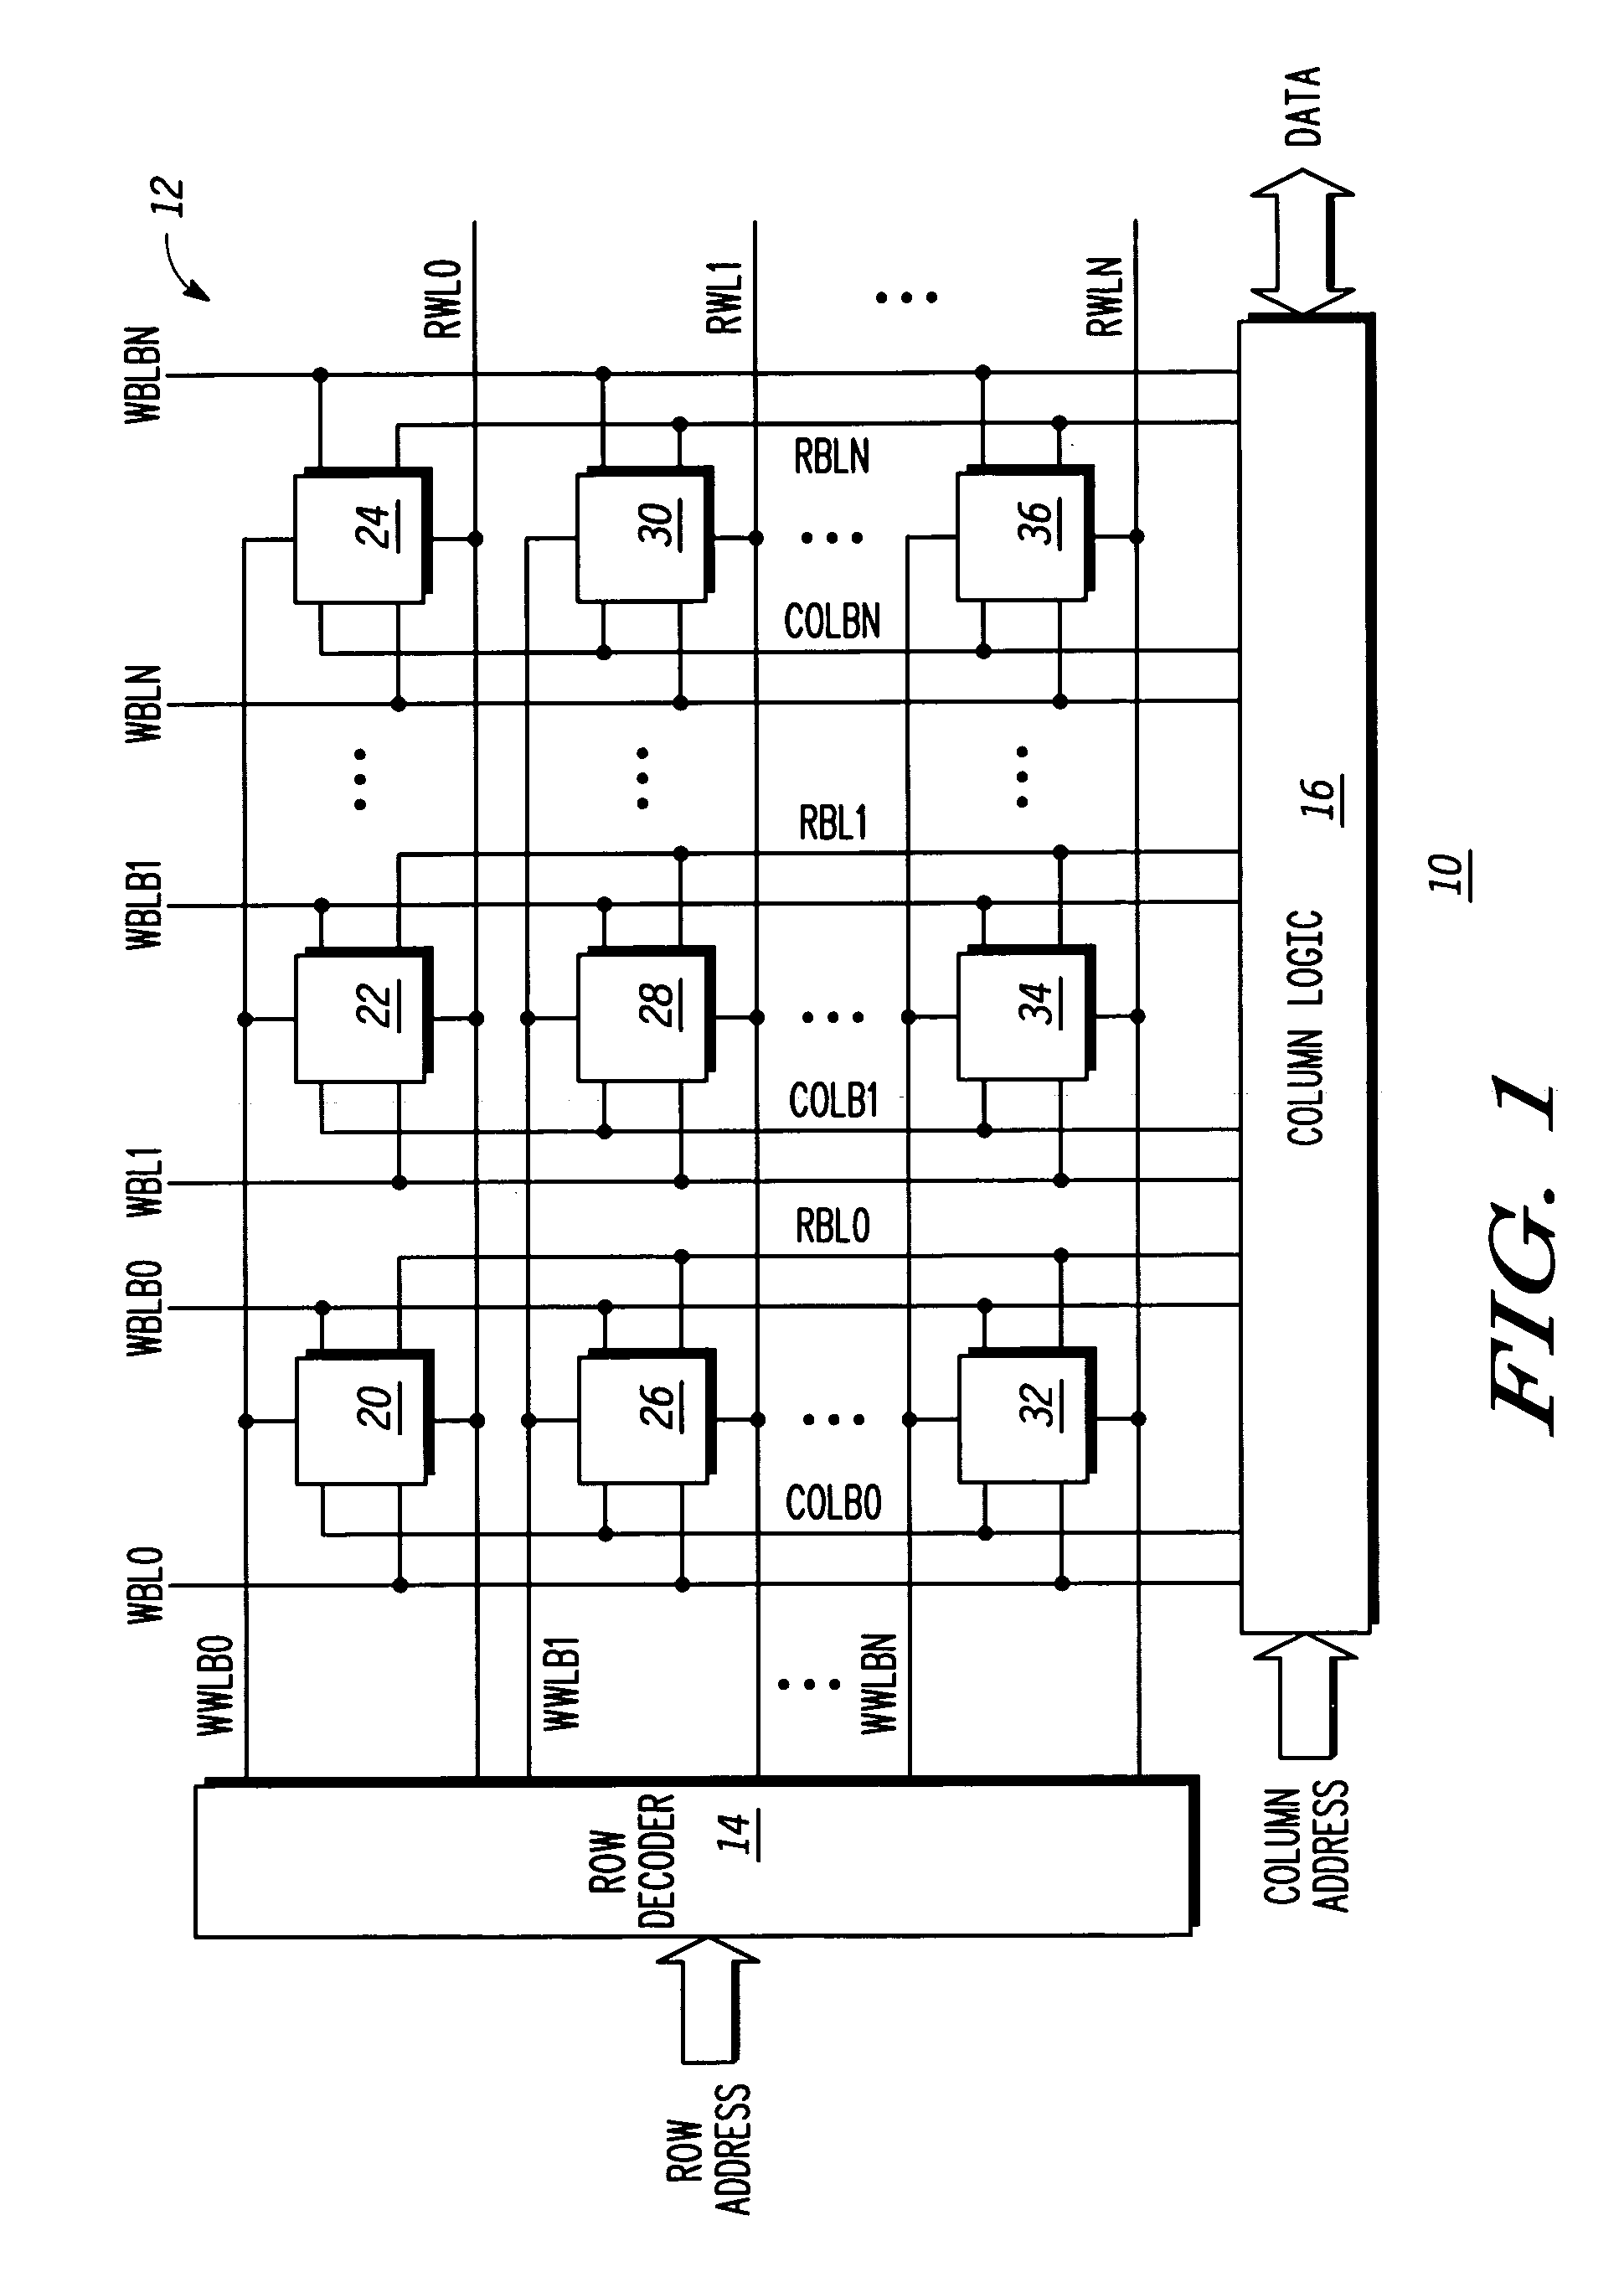 Dual-port static random access memory having improved cell stability and write margin